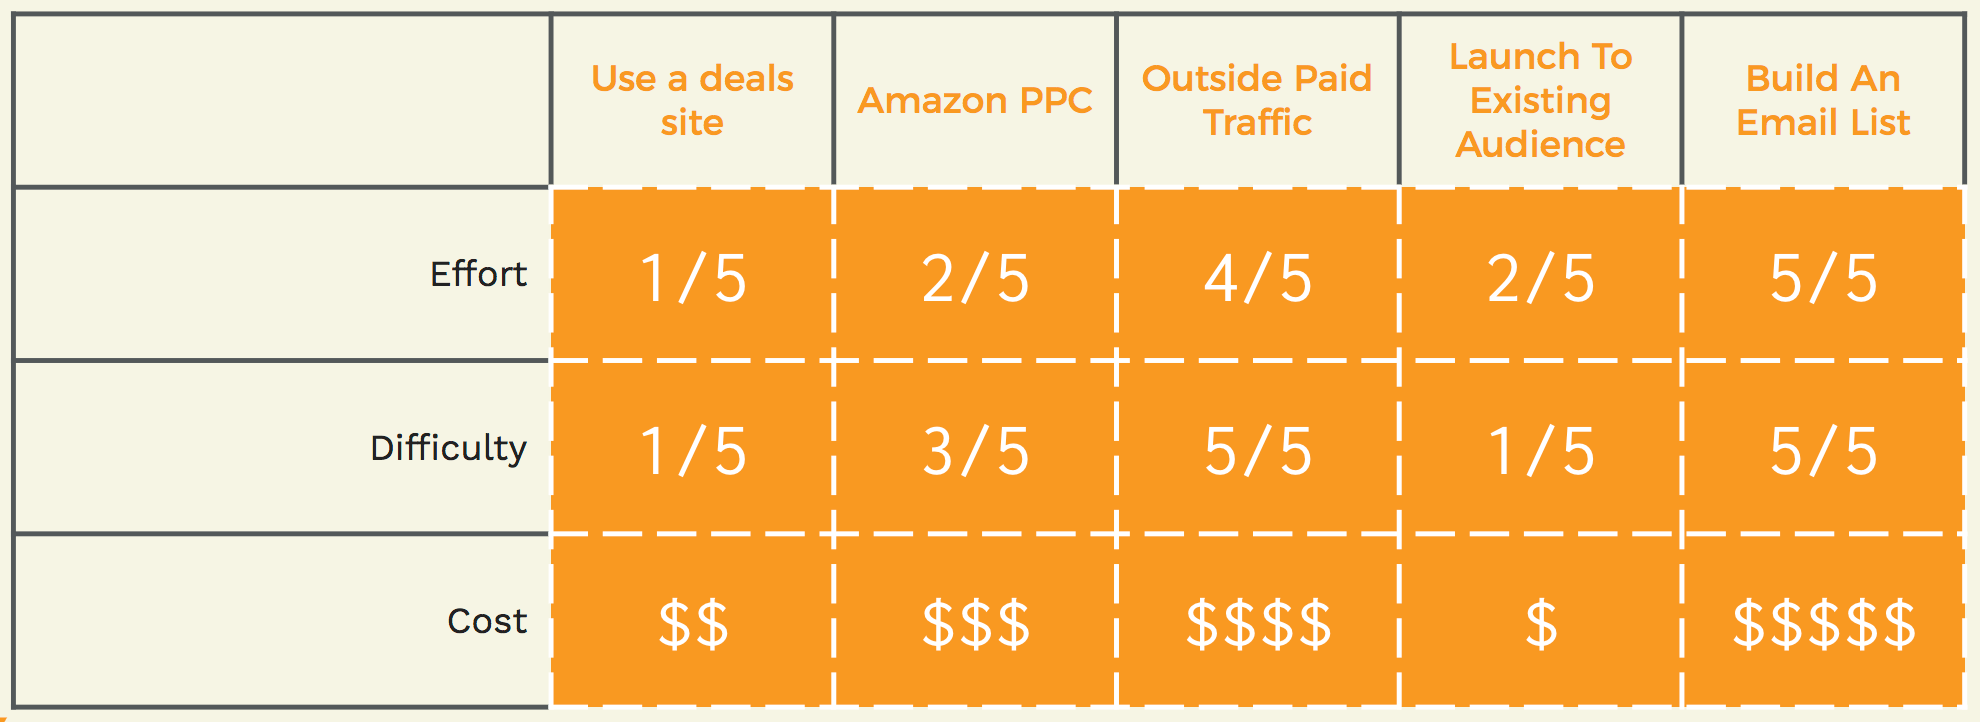 Amazon launch strategies - how to successful launch a product on Amazon FBA